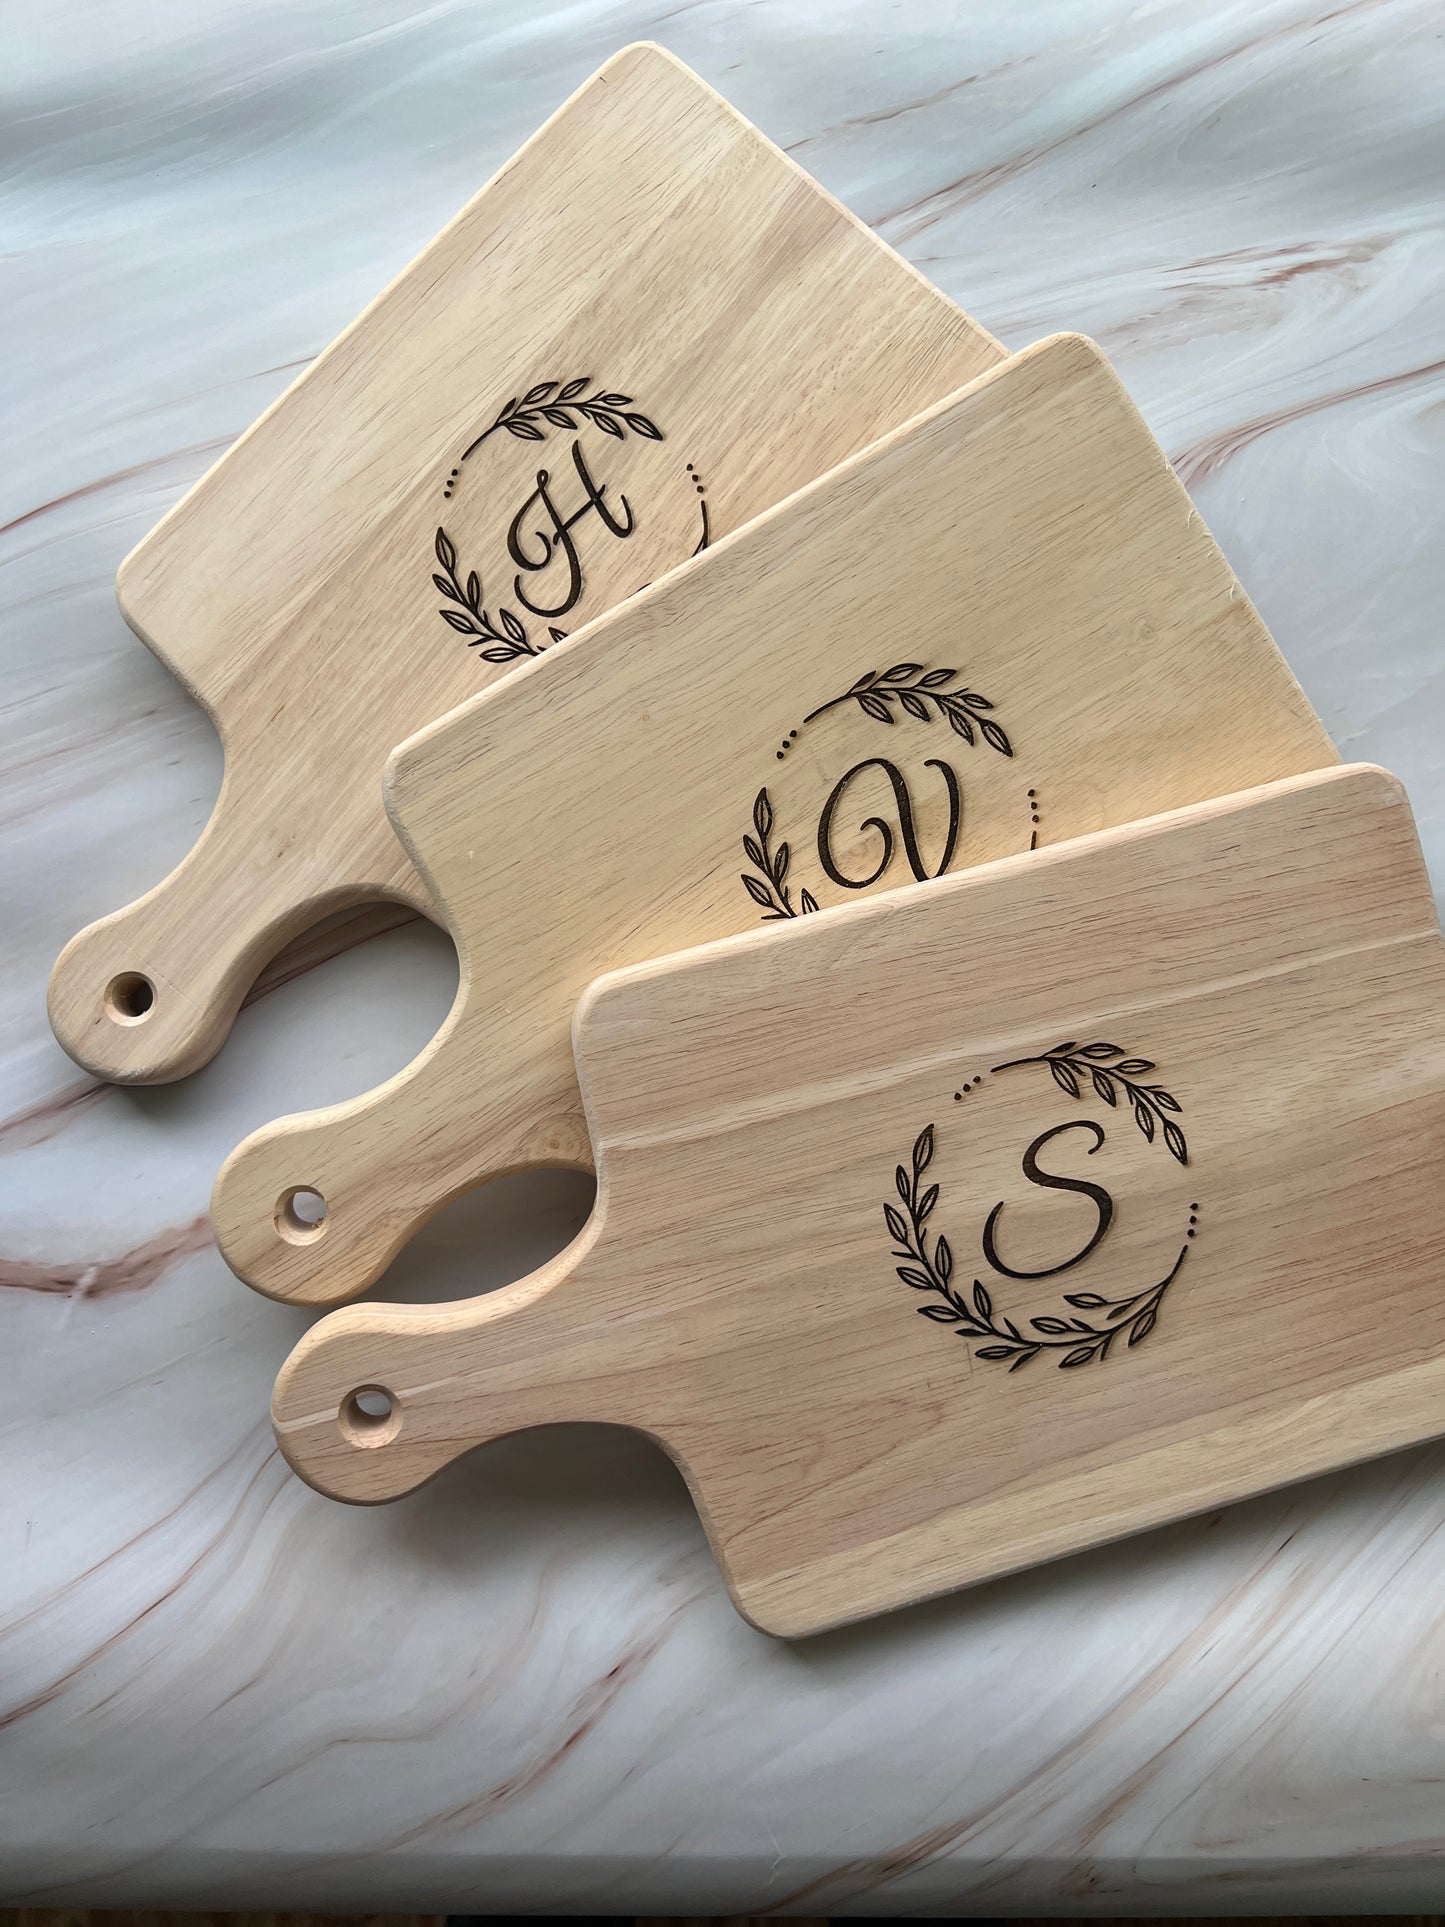 Personalized engraved cutting boards, custom favors, bridal & baby showers wedding, realtors, charcuterie parties wine tasting, butter board